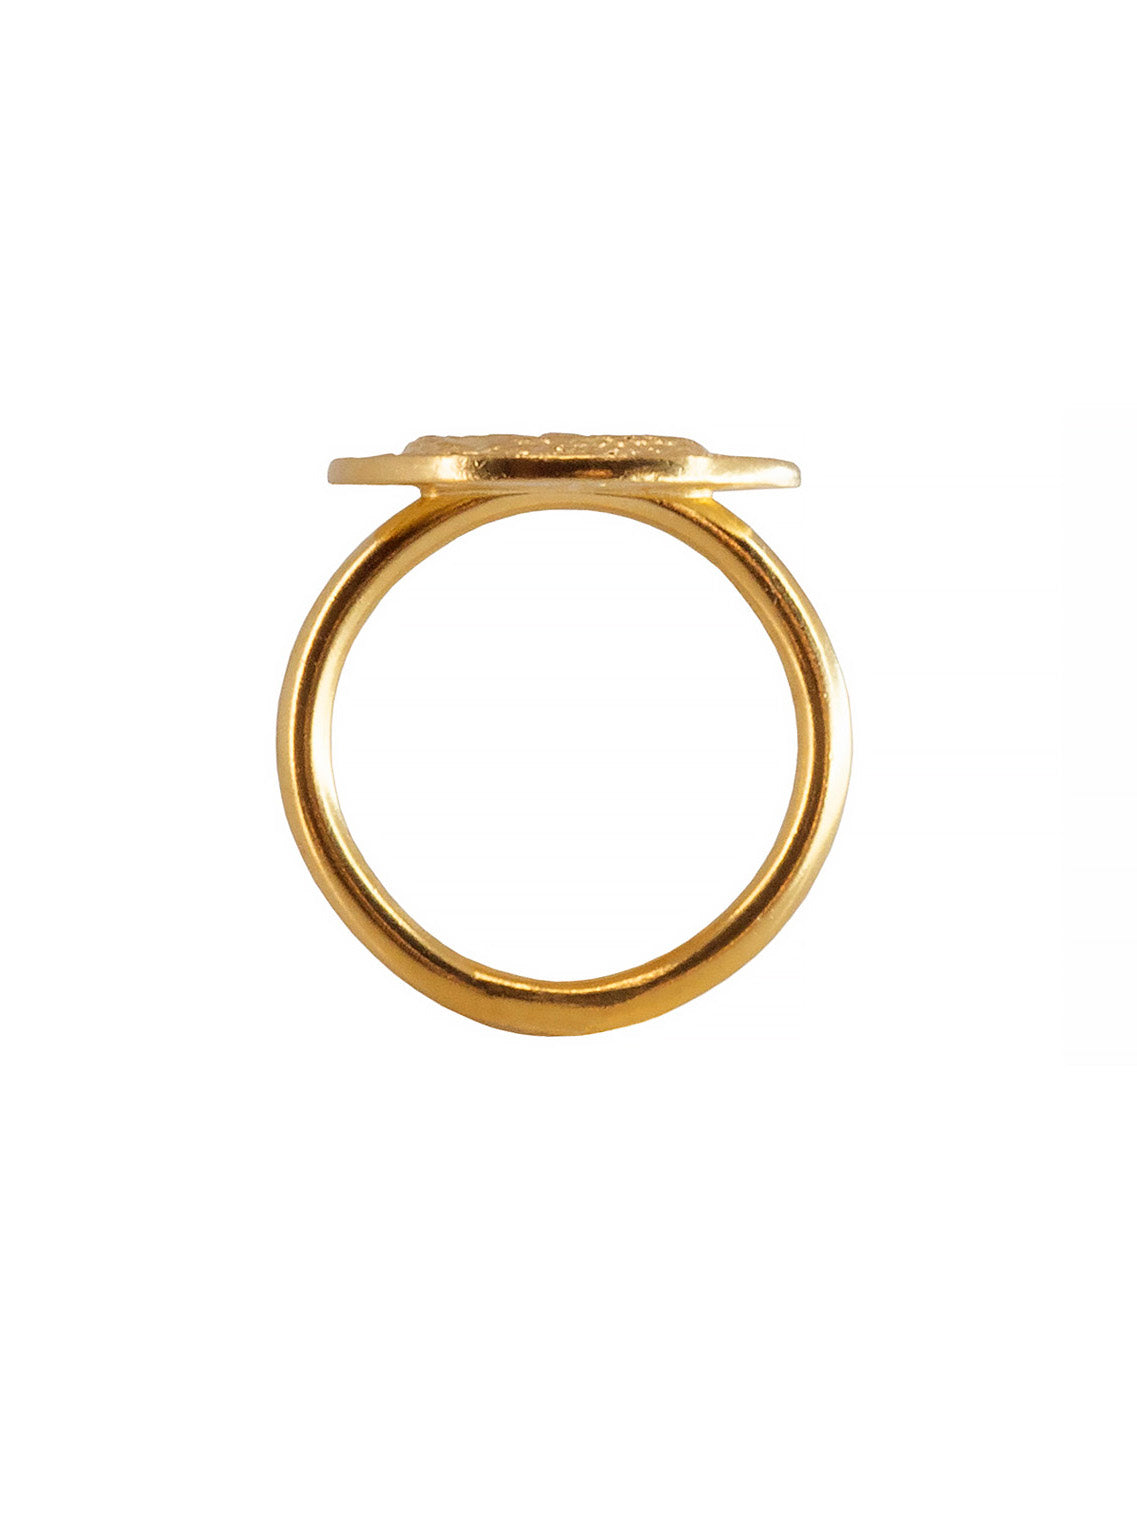 Blood type A Positive Ring. 23ct Gold plated Sterling Silver.Grupo sanguineo Anillo, Dorado